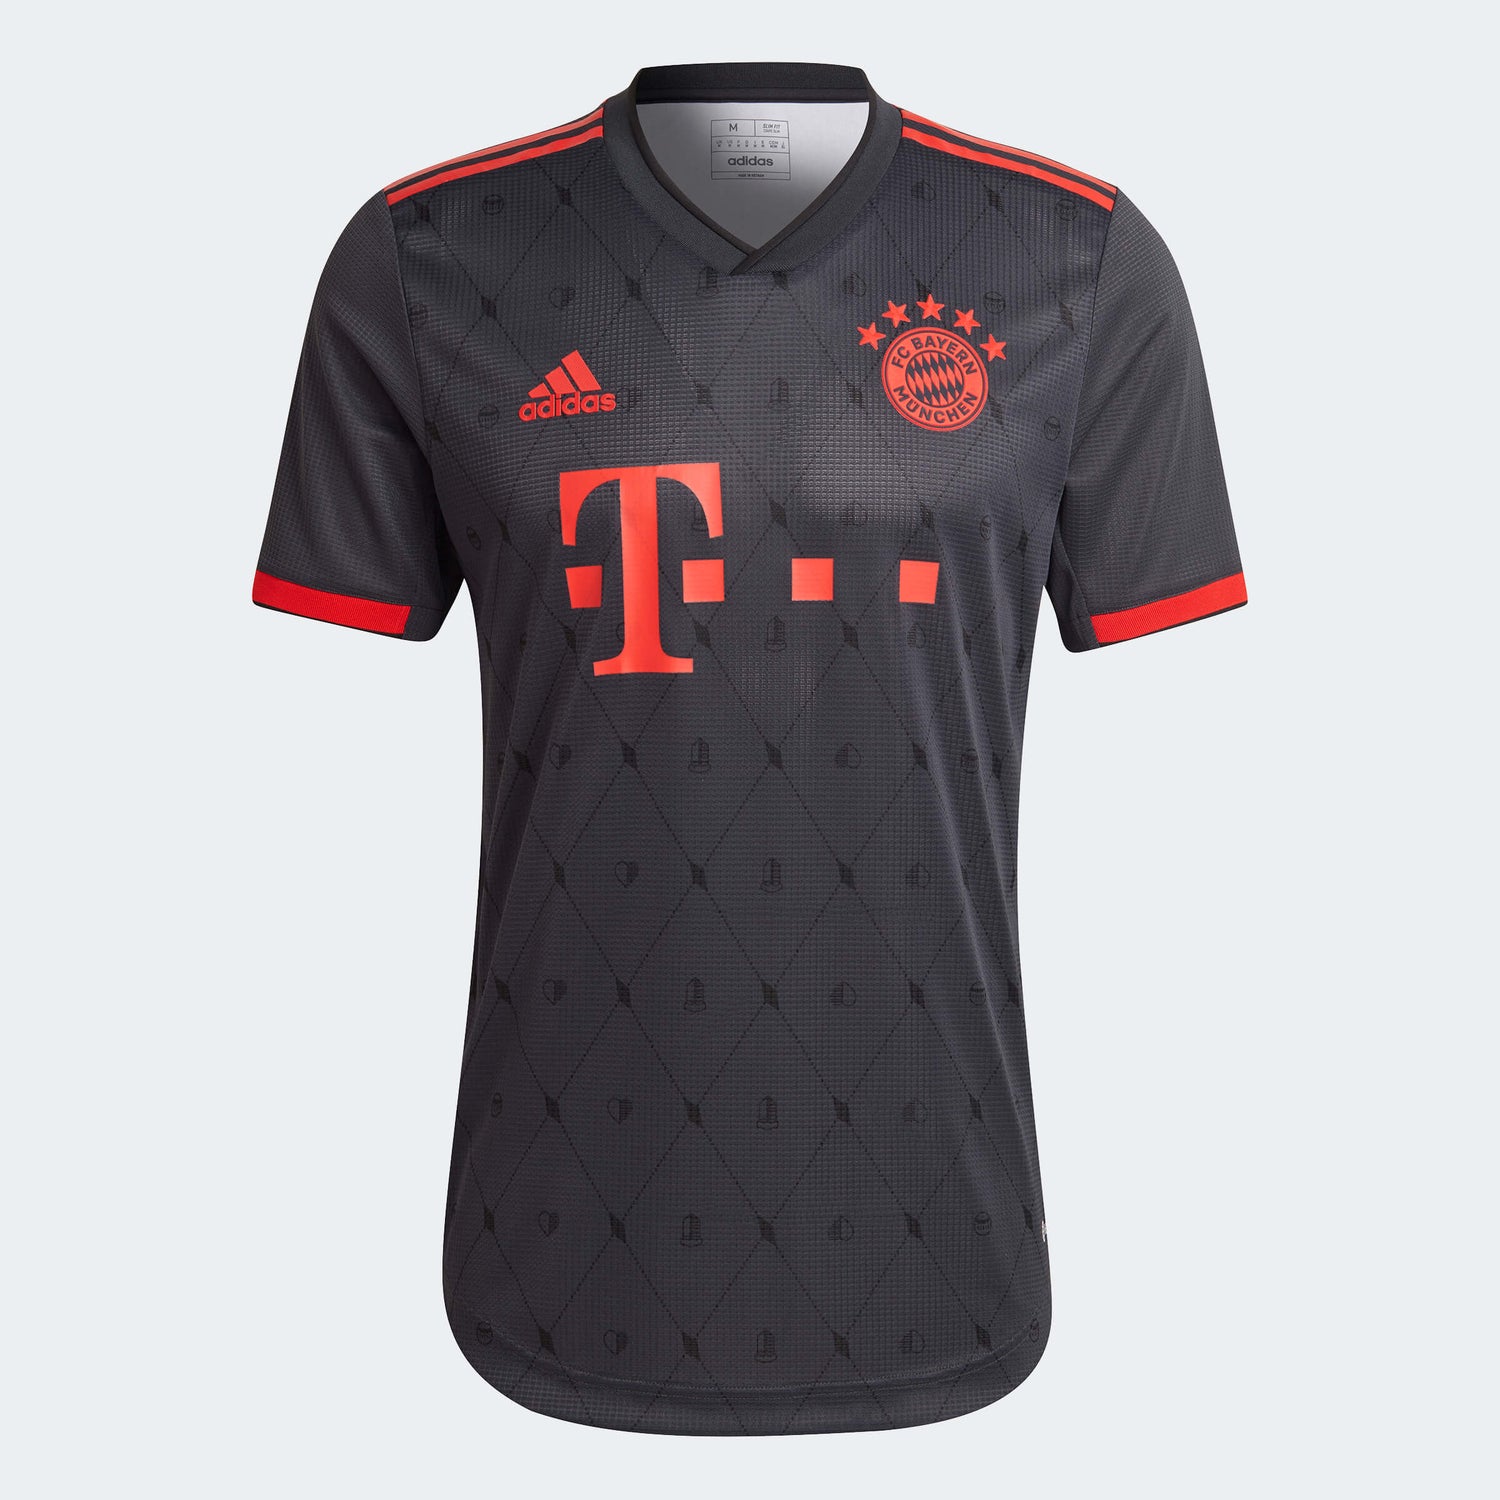 adidas - Score big with your very own FCB jersey featuring Harry